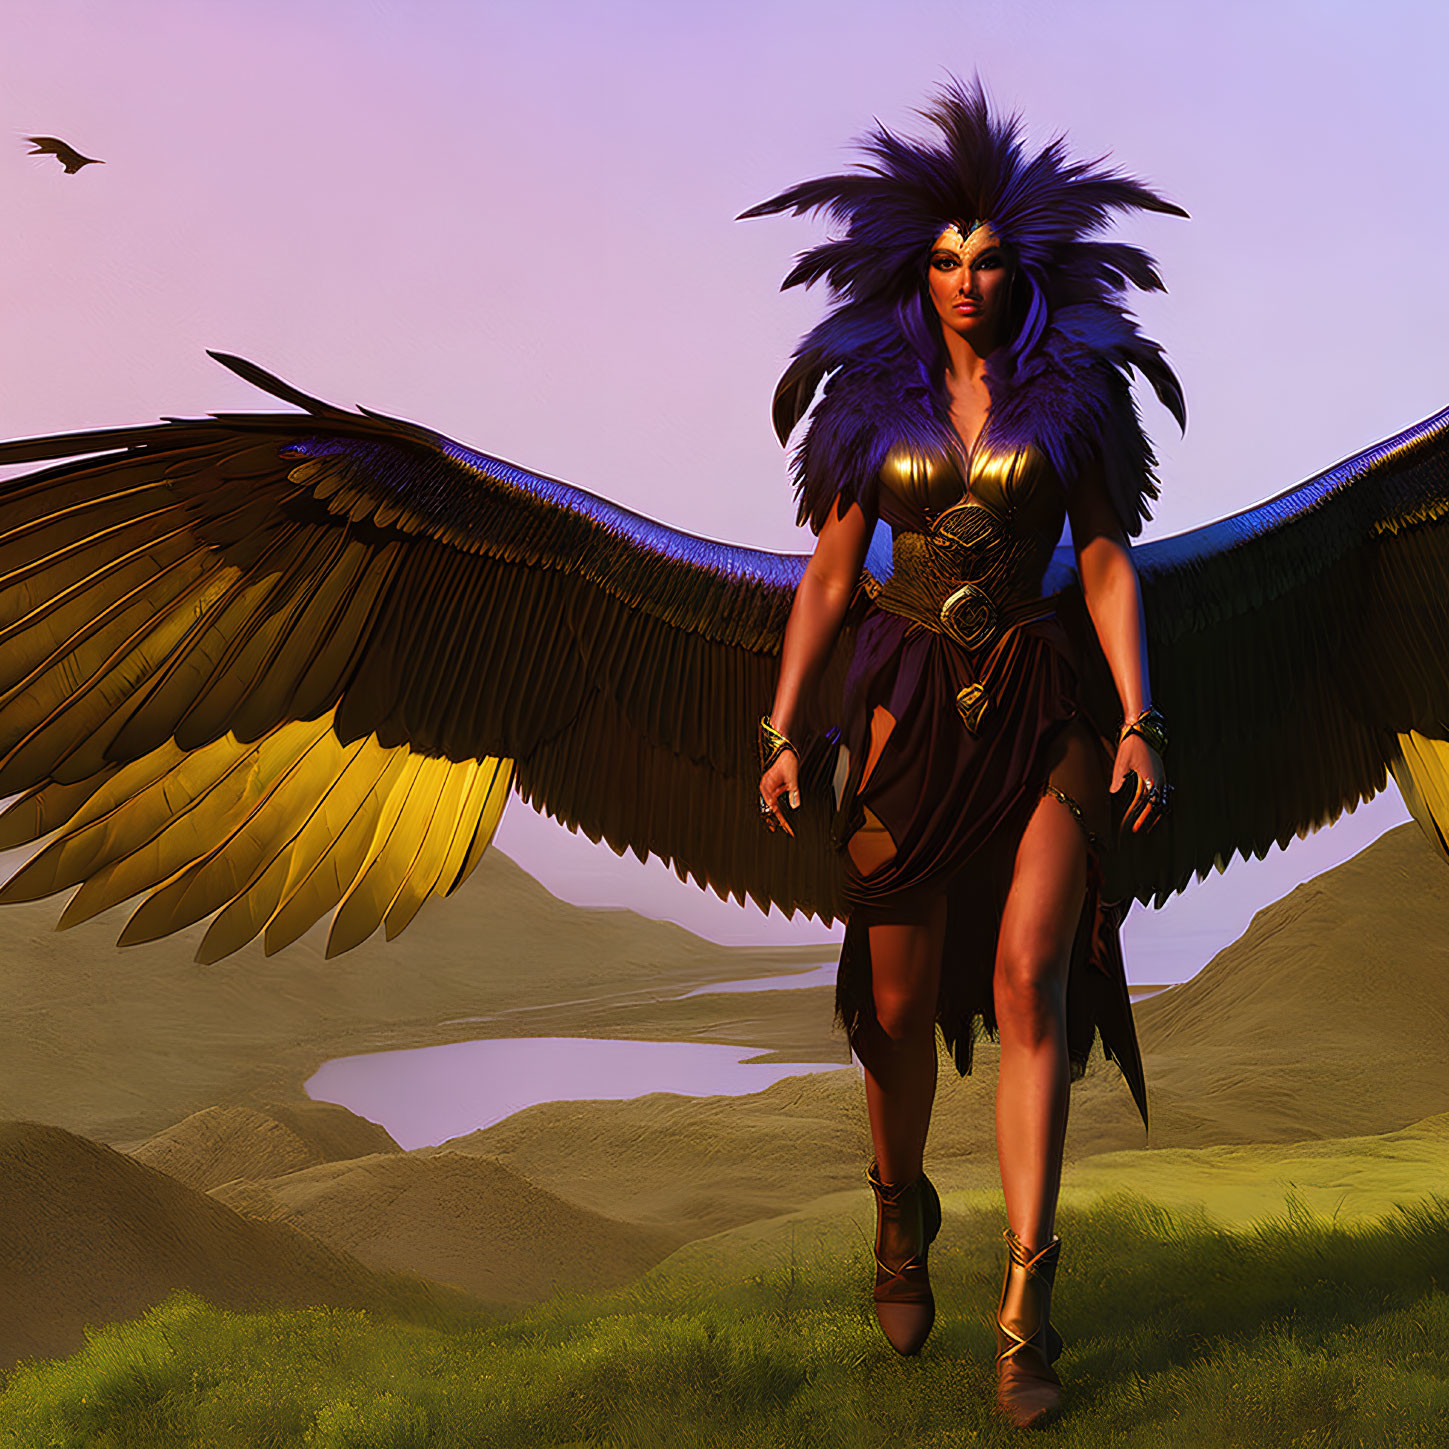 Majestic fantasy character with golden wings and purple attire in desert landscape